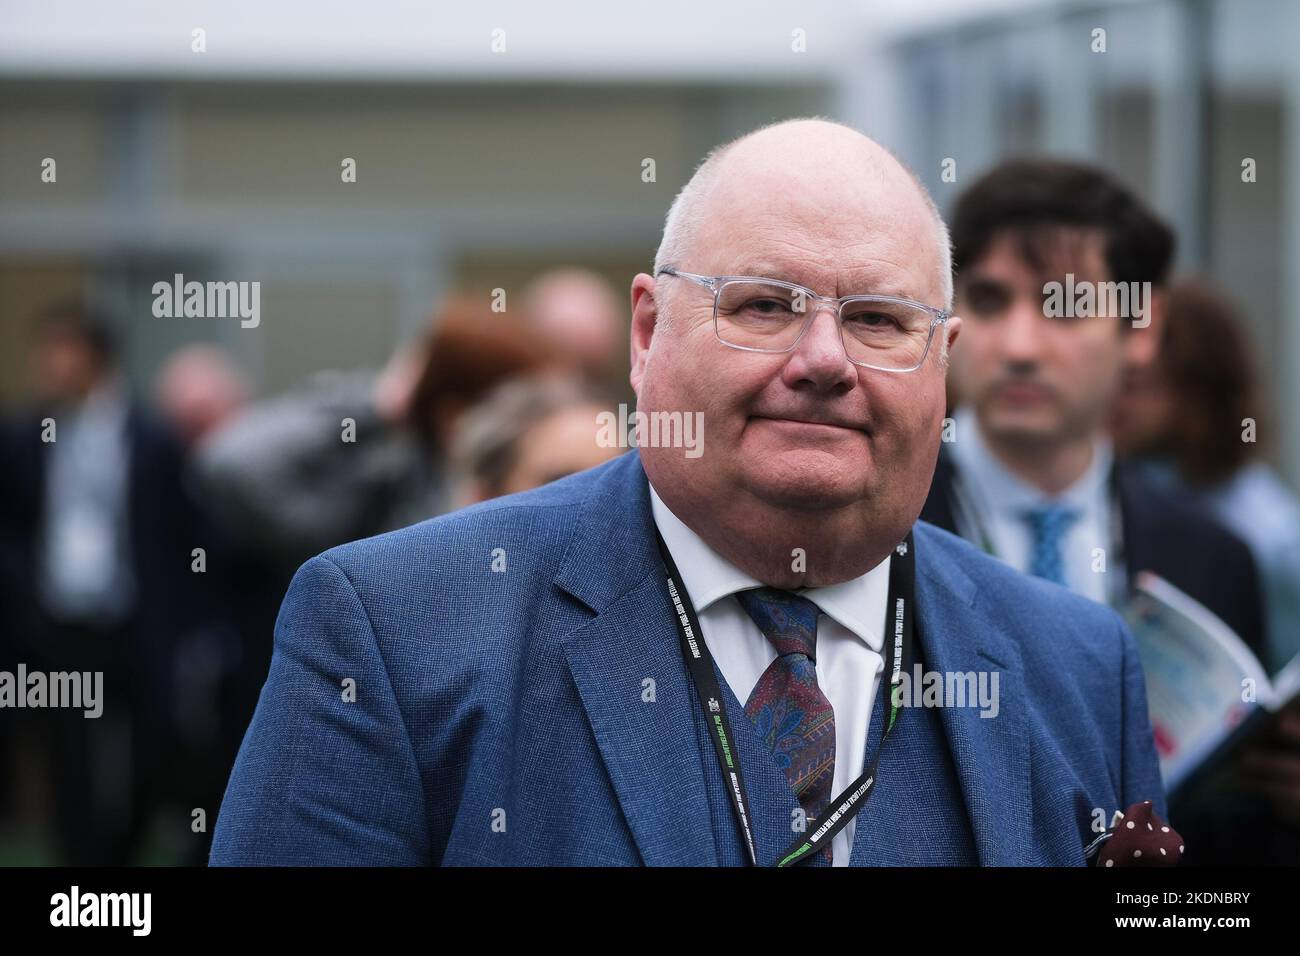 Lord Eric Pickles photographed during the Conservative Party Autumn Conference held at The International Convention Centre , Birmingham on Tuesday 4 October 2022 . Picture by Julie Edwards. Stock Photo